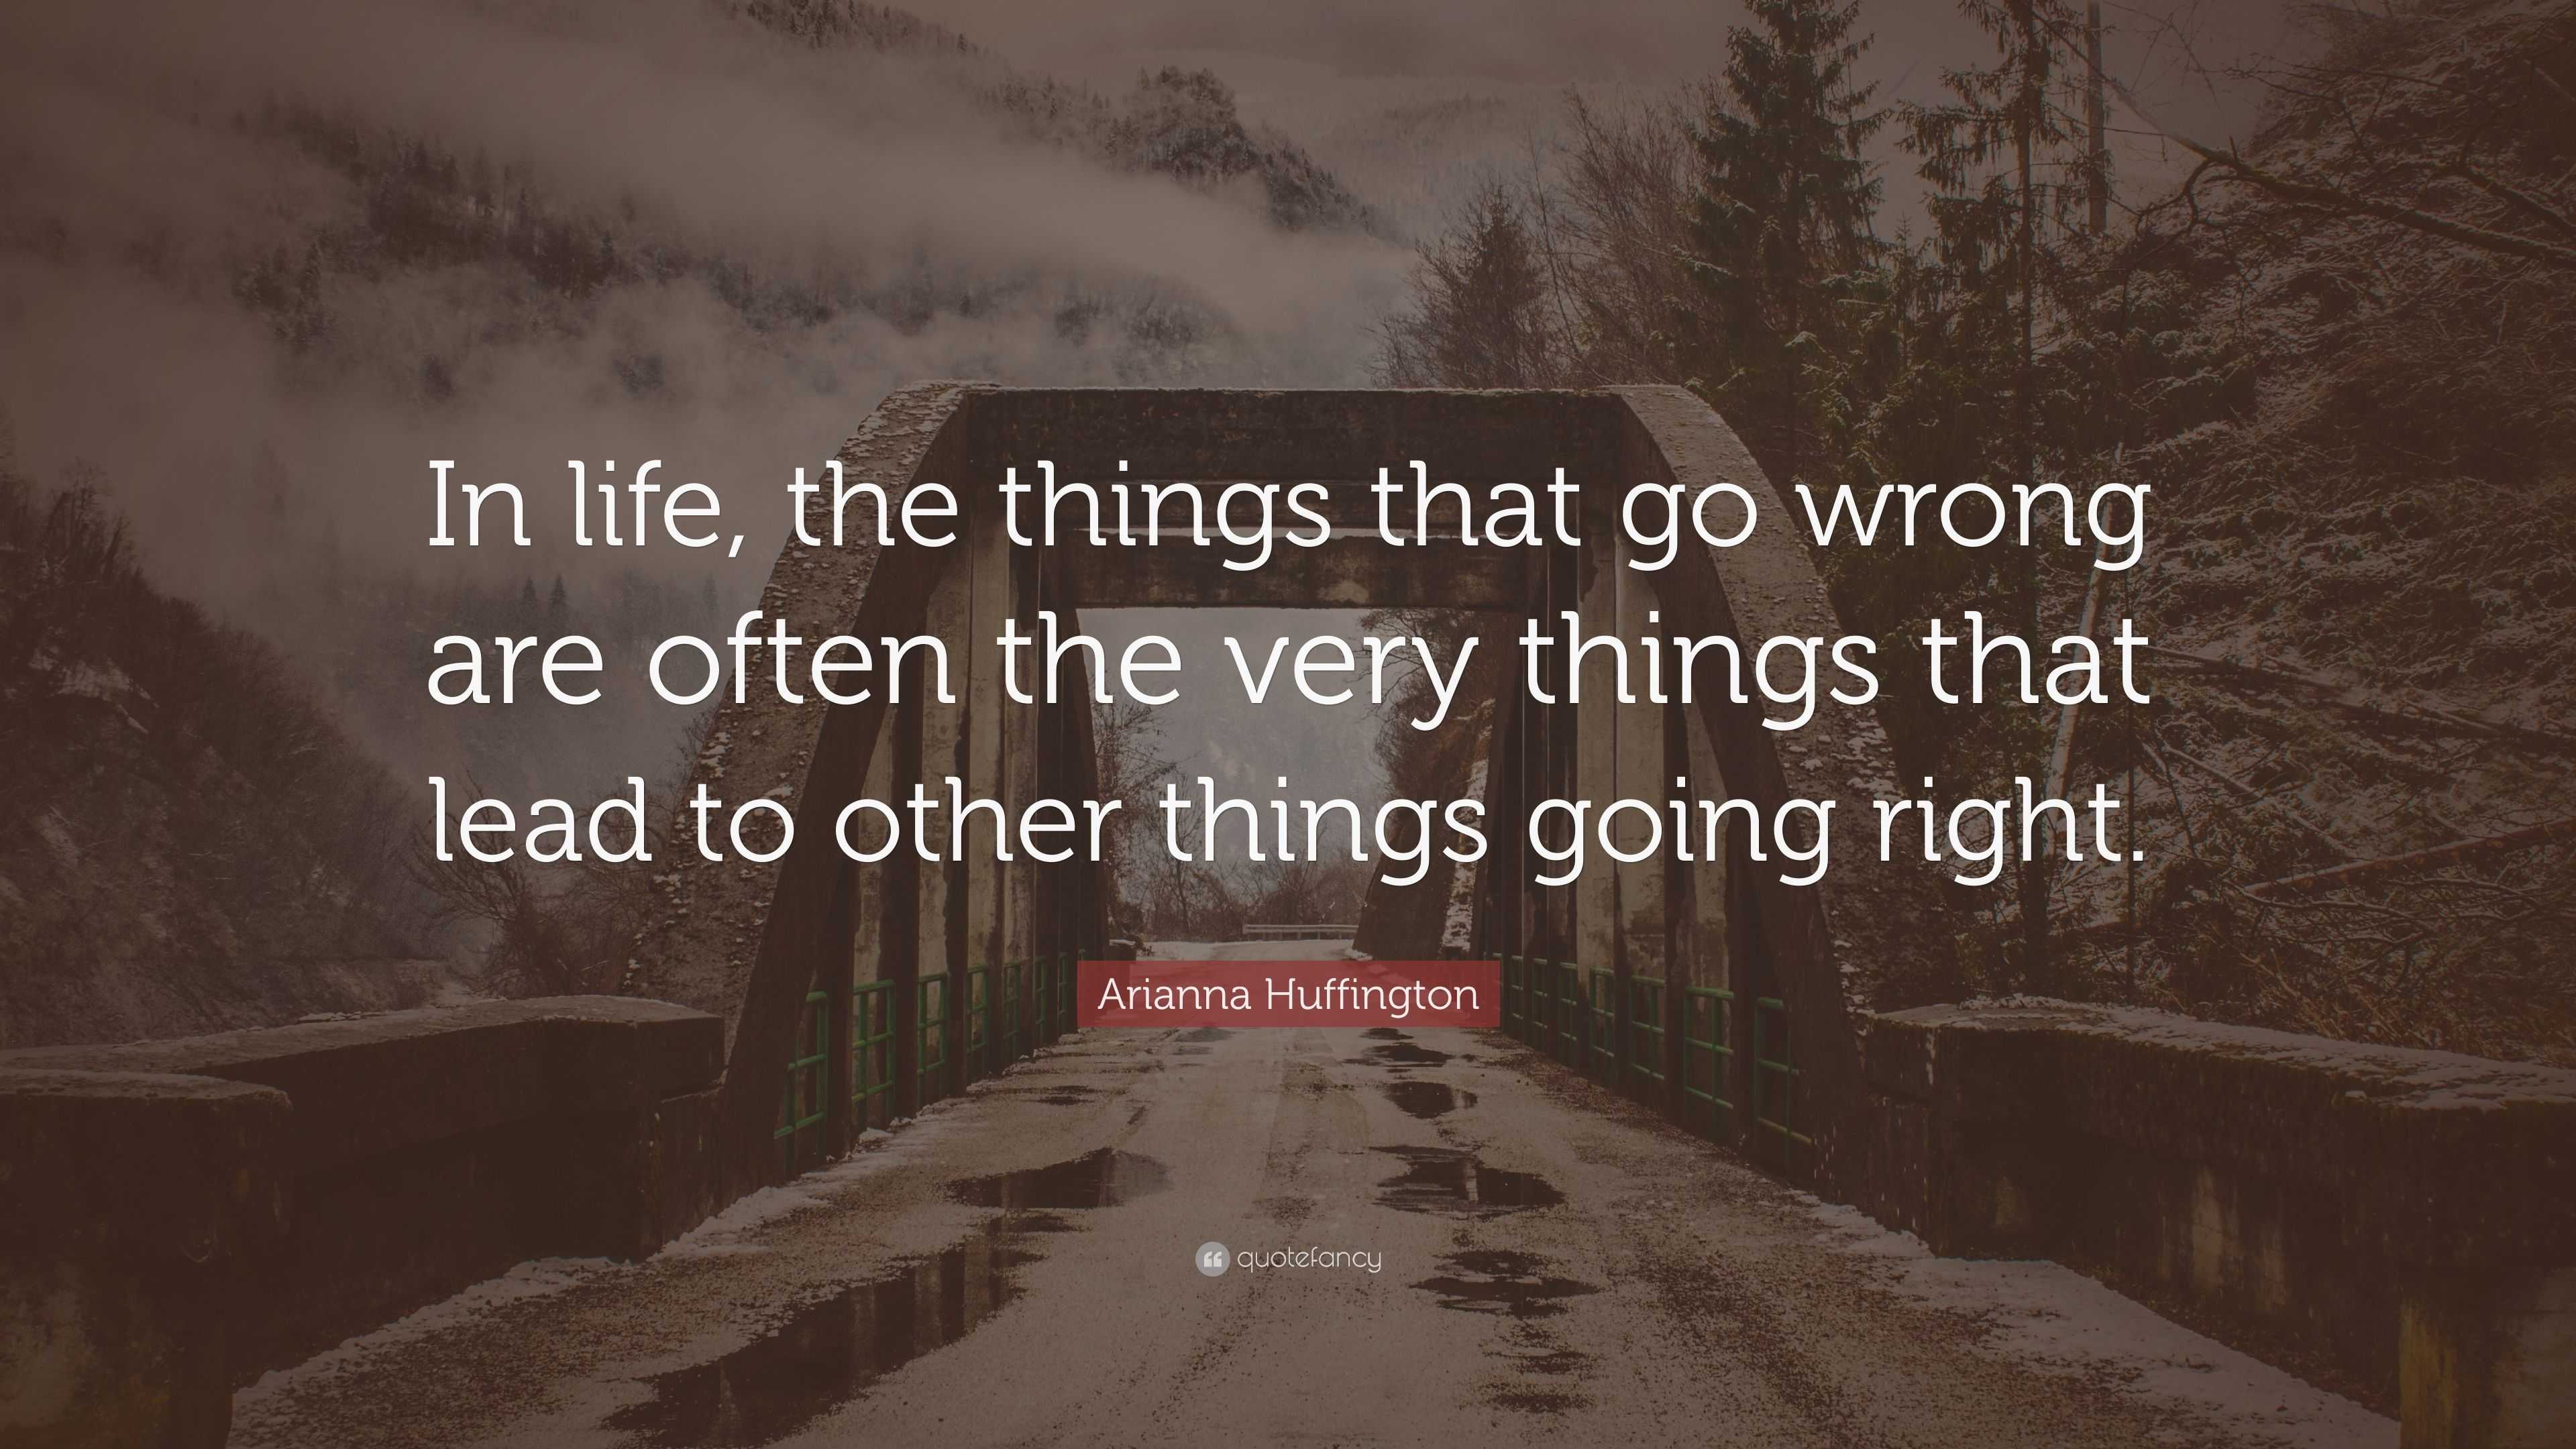 Arianna Huffington Quote: “In life, the things that go wrong are often ...